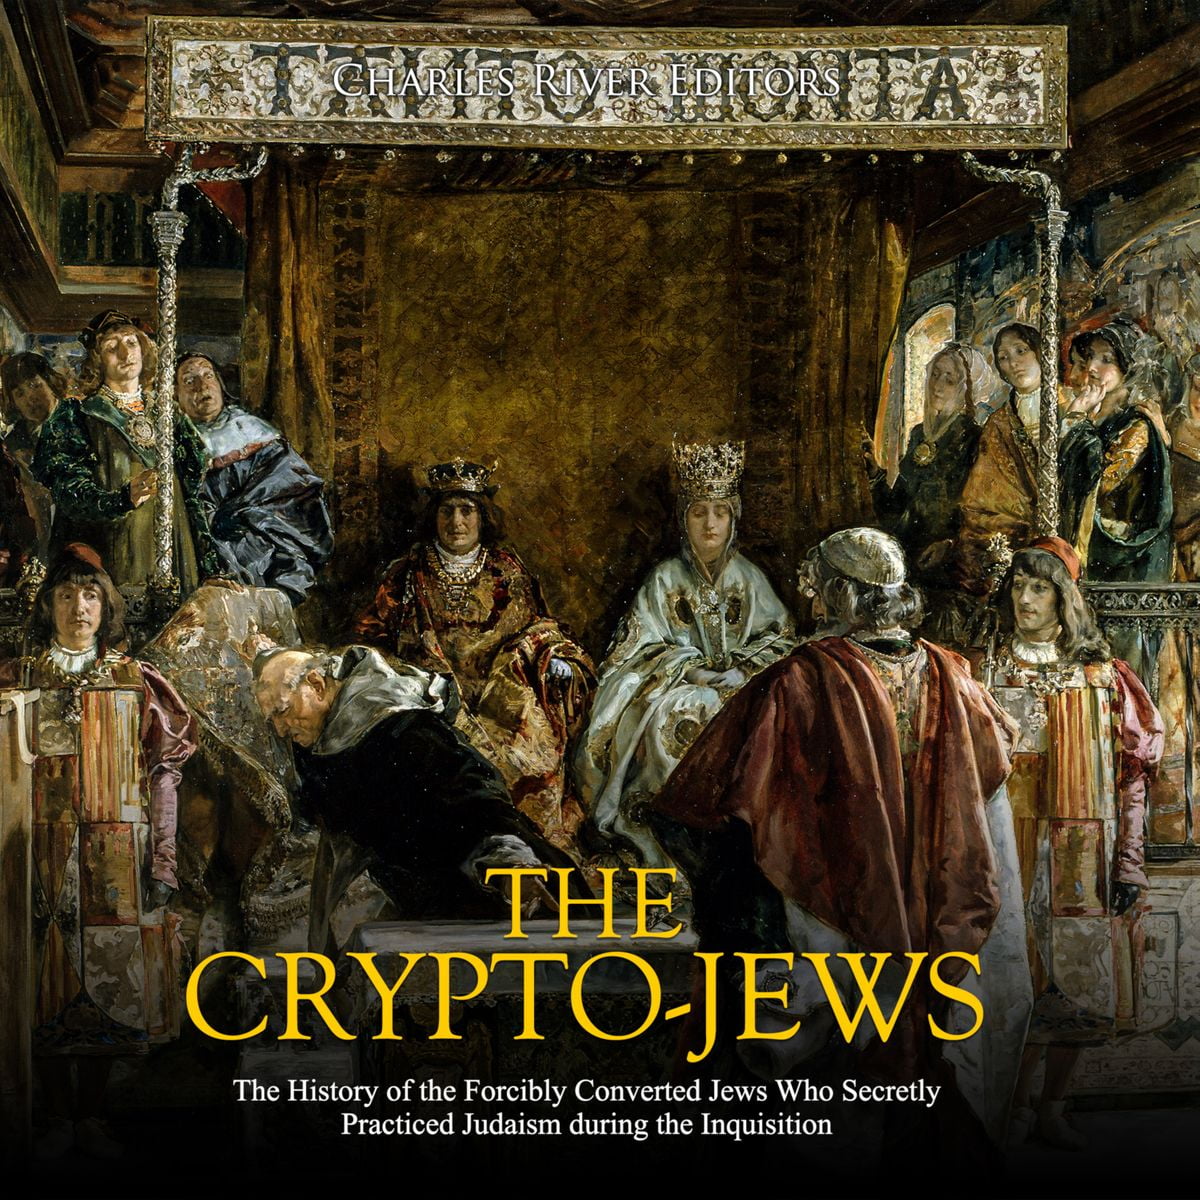 Crypto-Jews, The: The History of the Forcibly Converted Jews Who